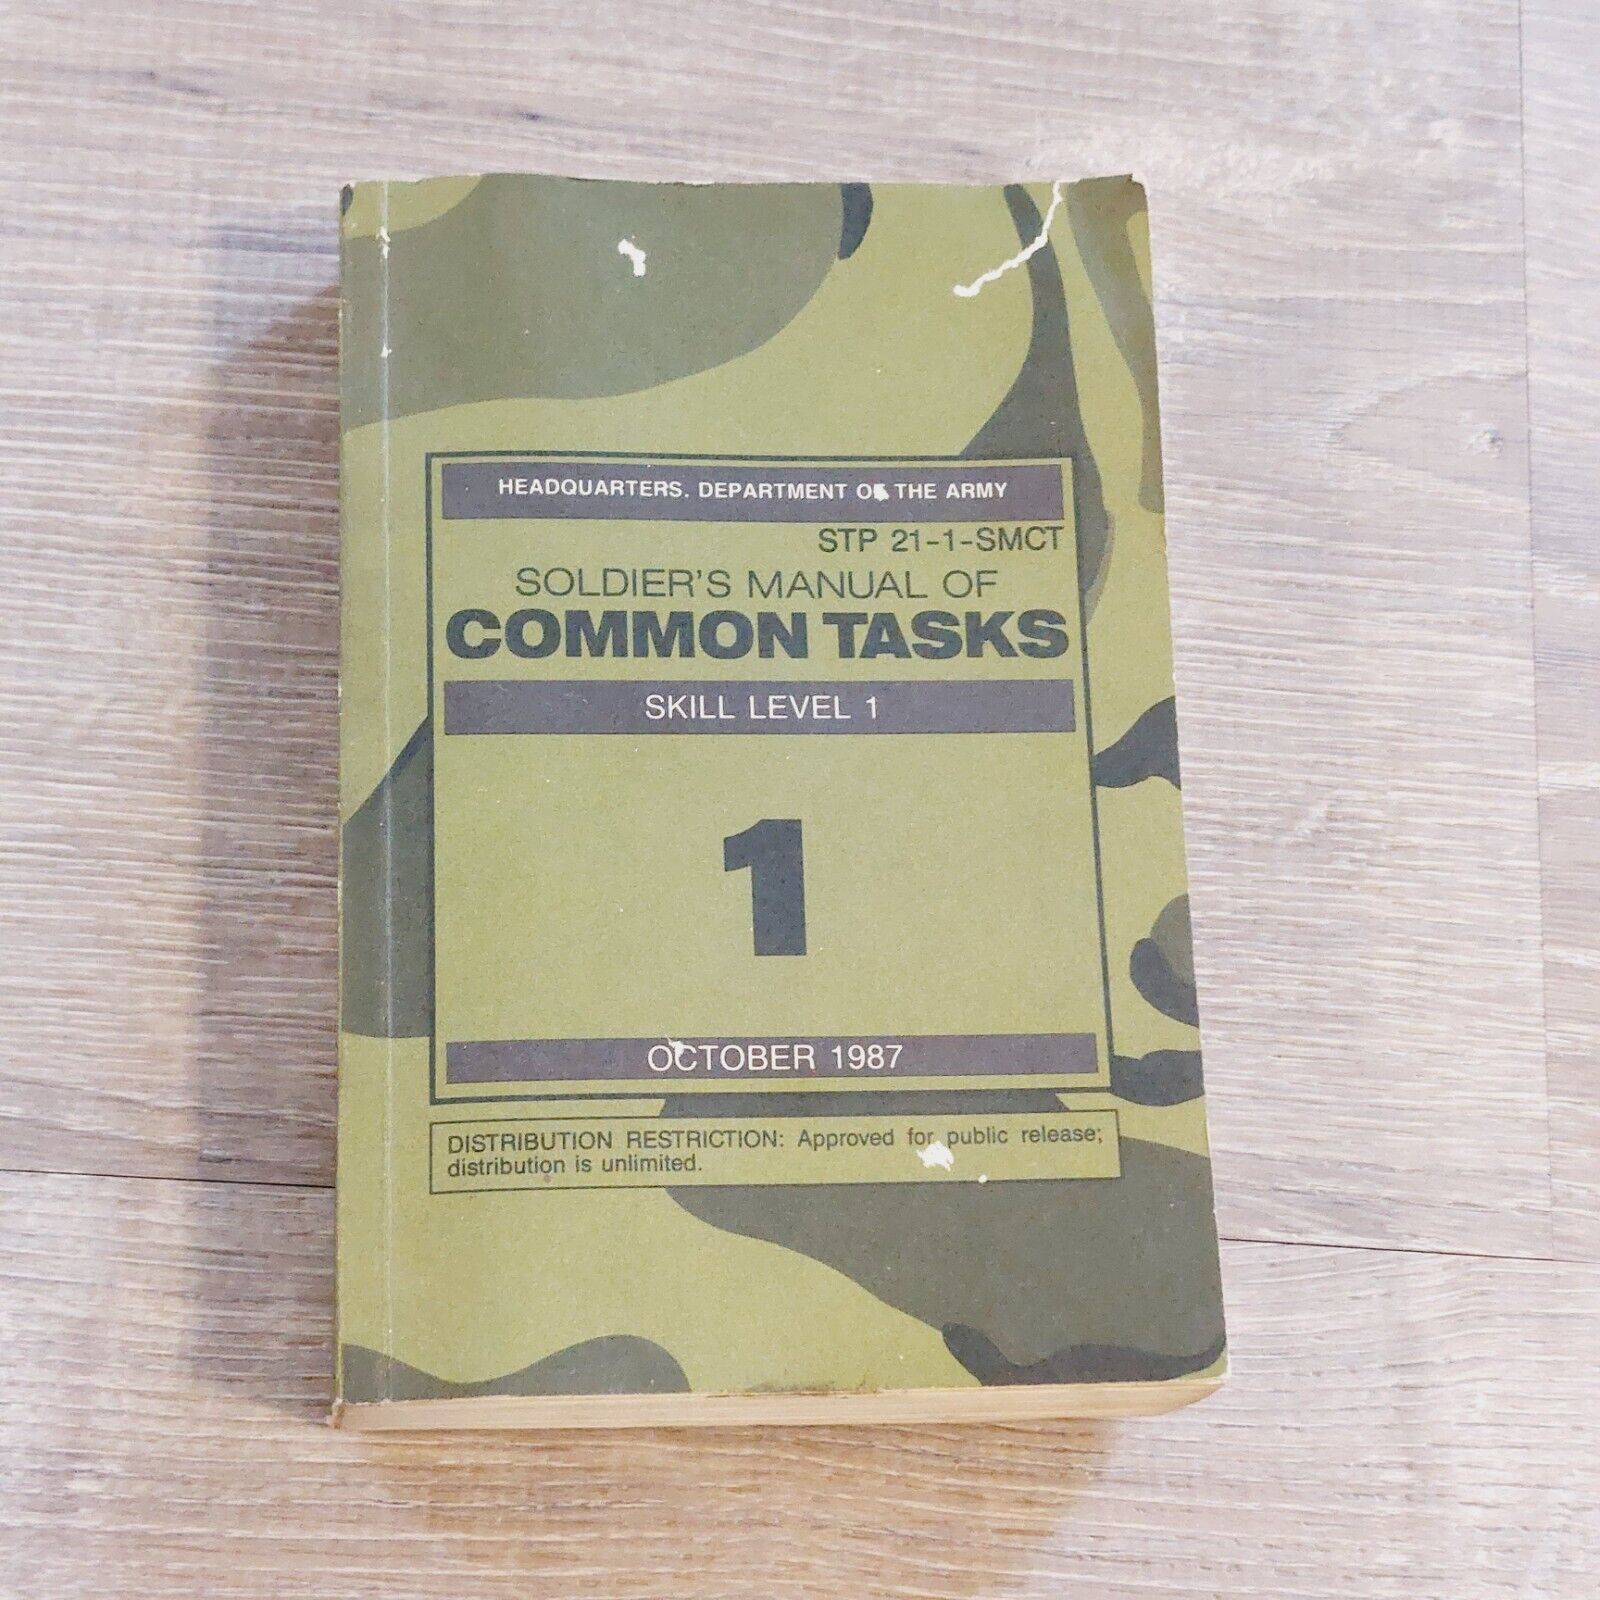 Soldier's Manual of Common Tasks Skill Level 1 STP 21-1-SMCT October 1987